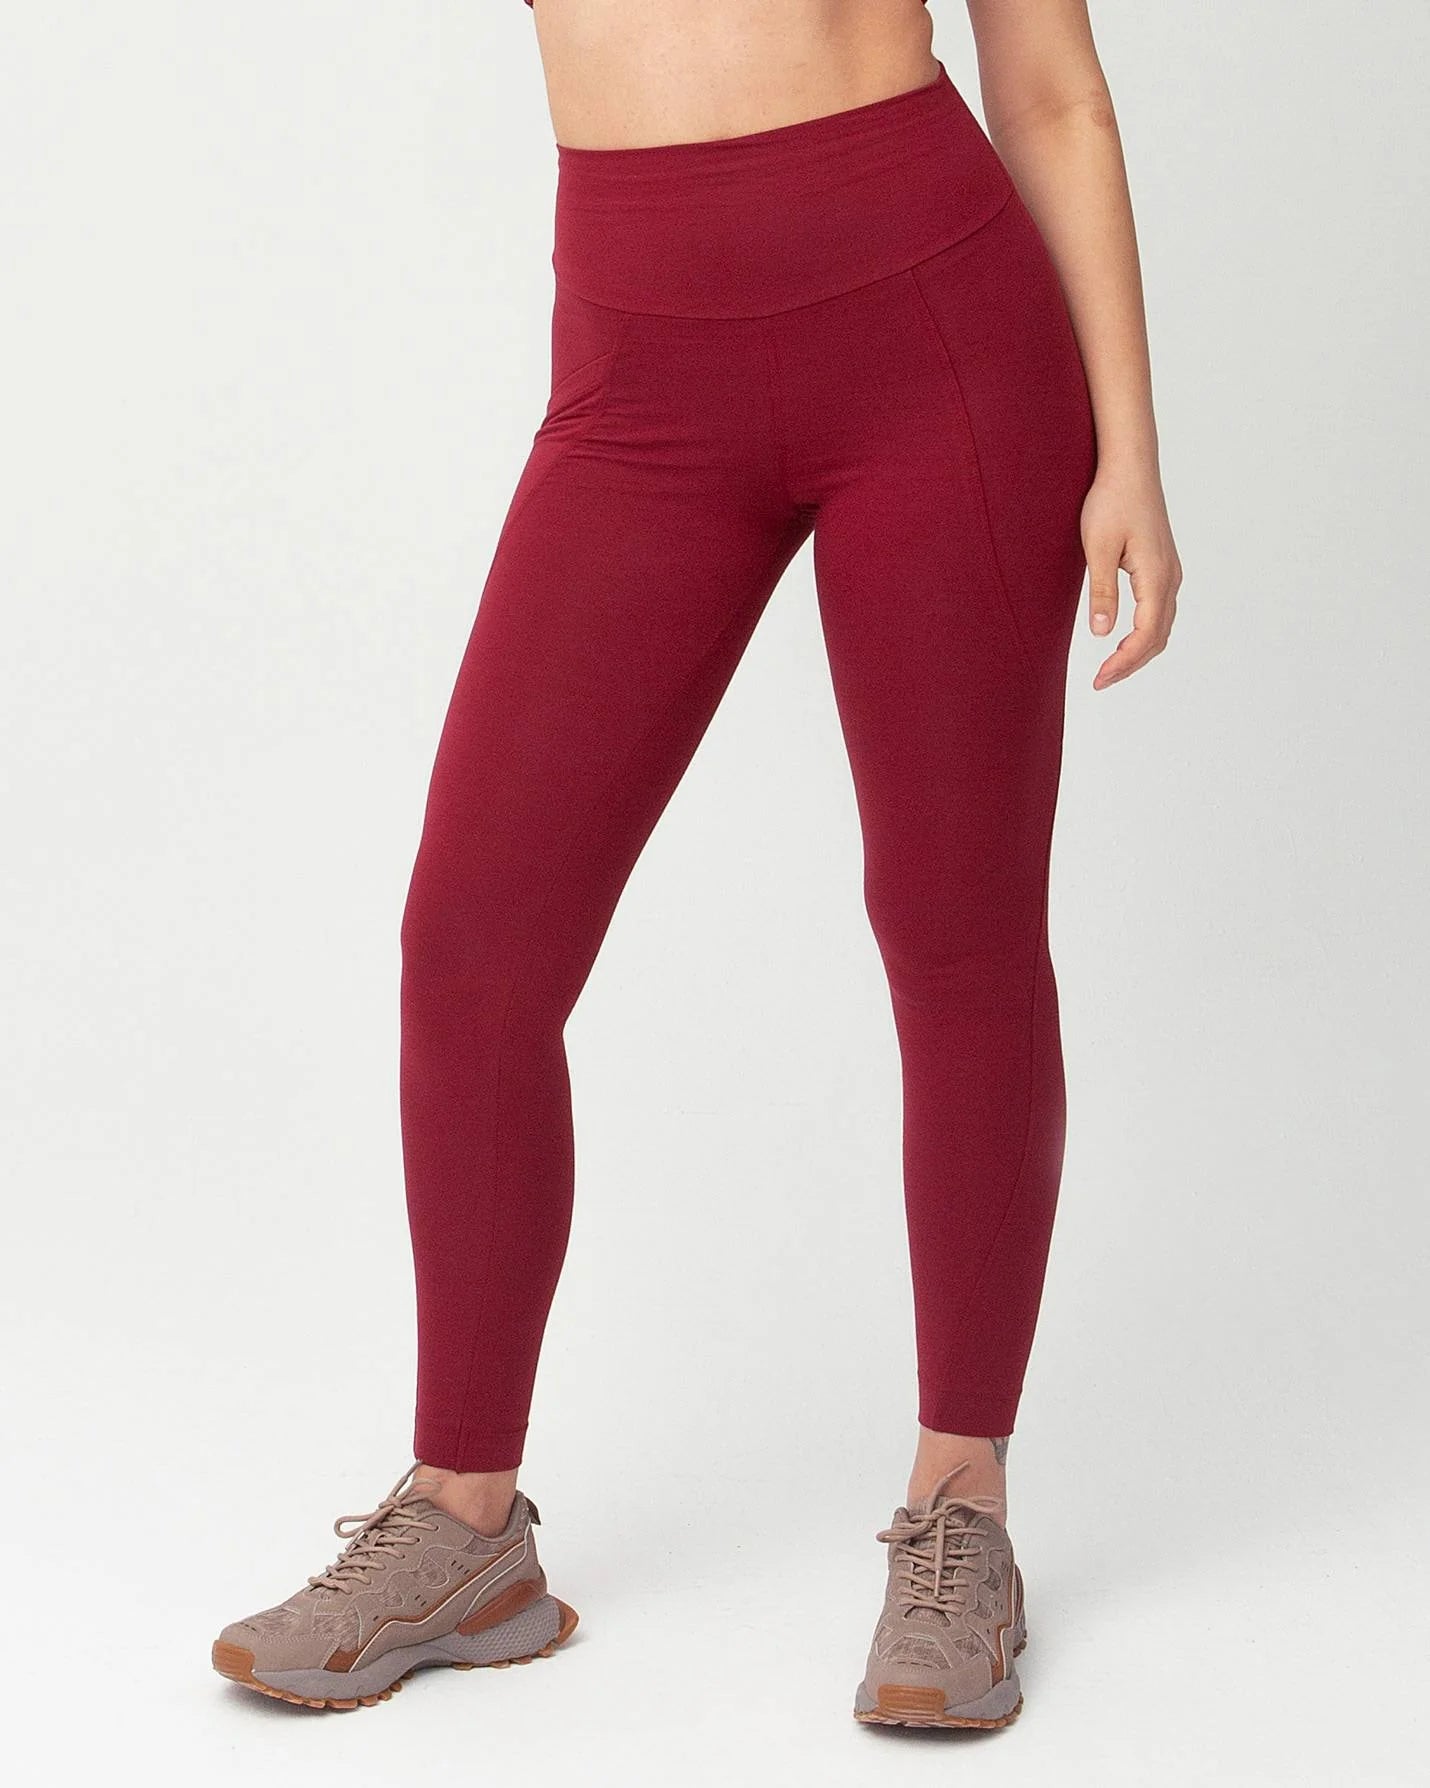 Organic Cotton Leggings with Side Pocket